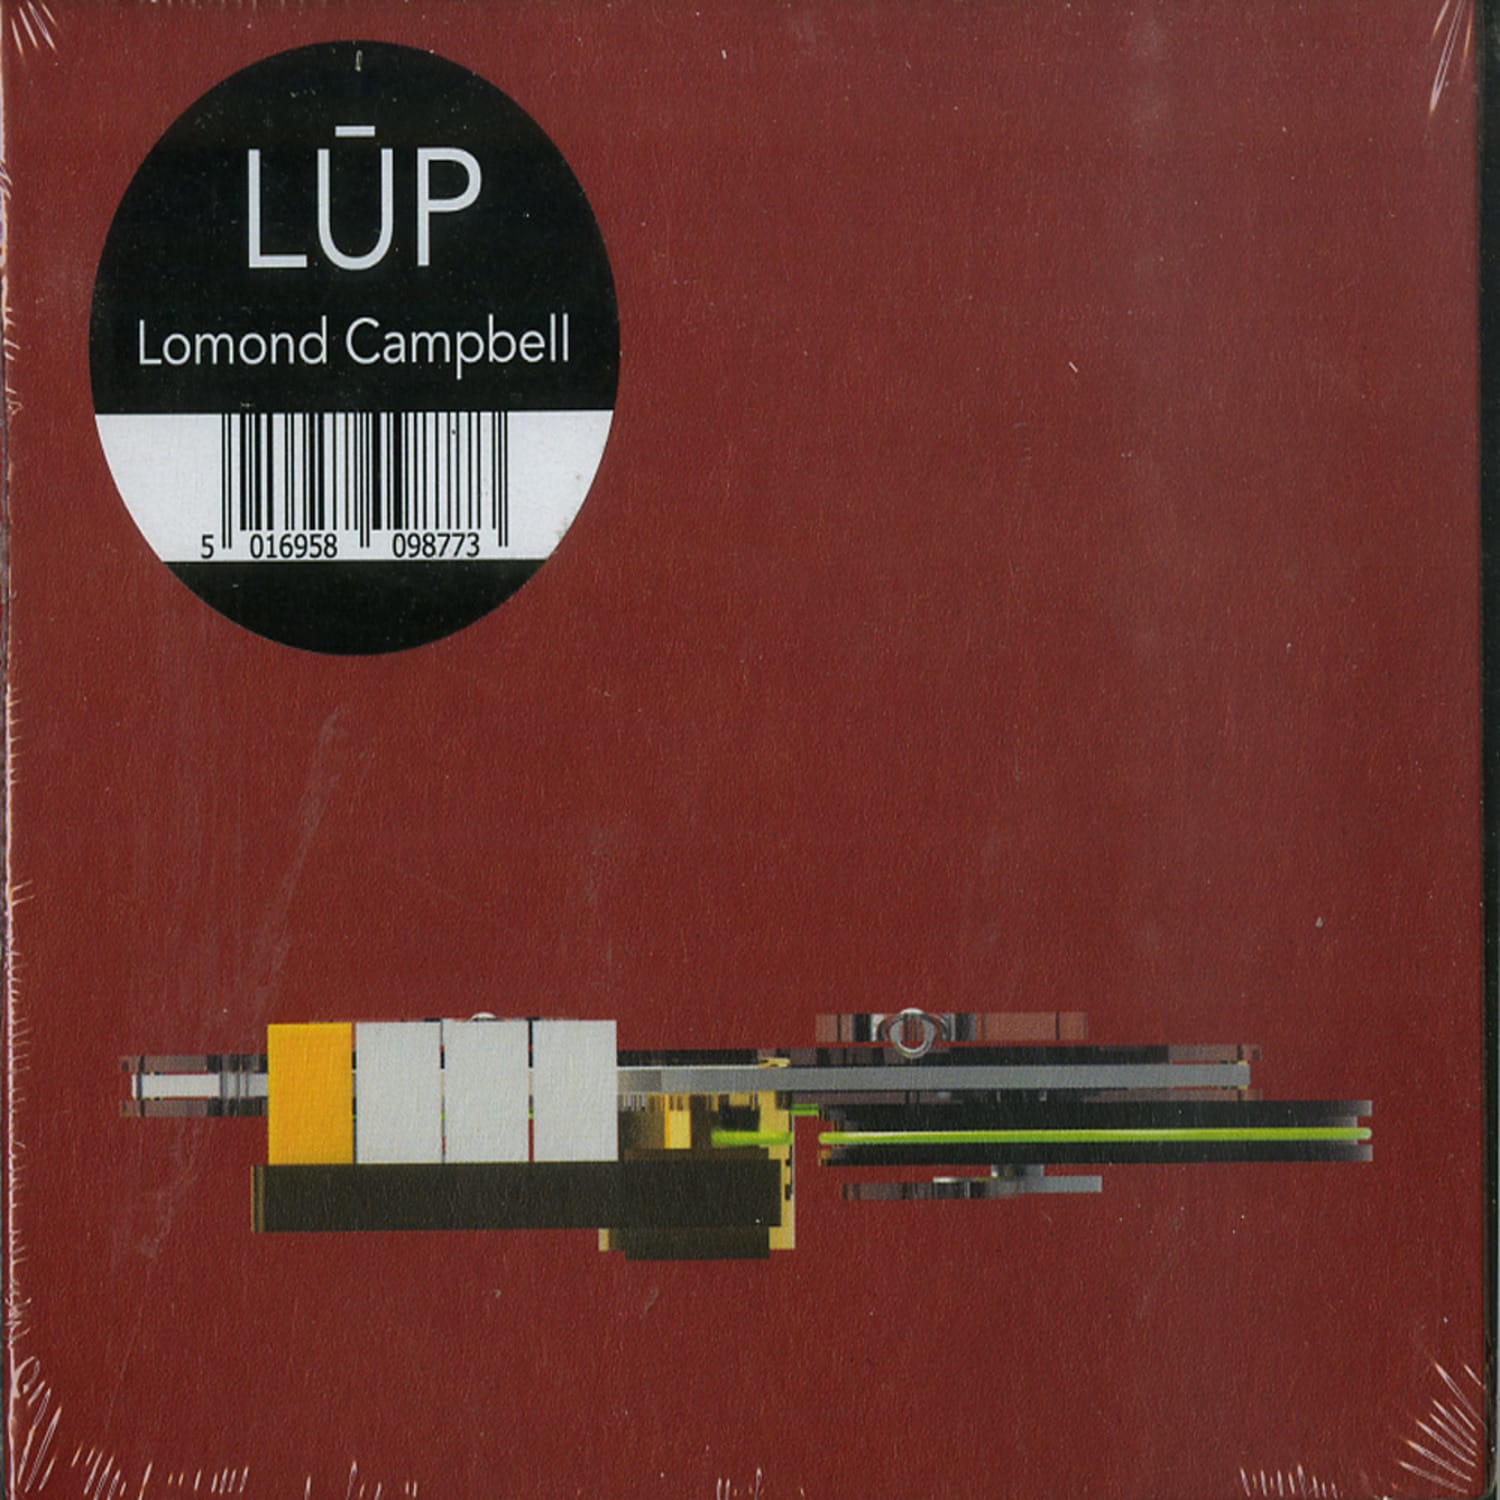 Lomond Campbell - LUP 